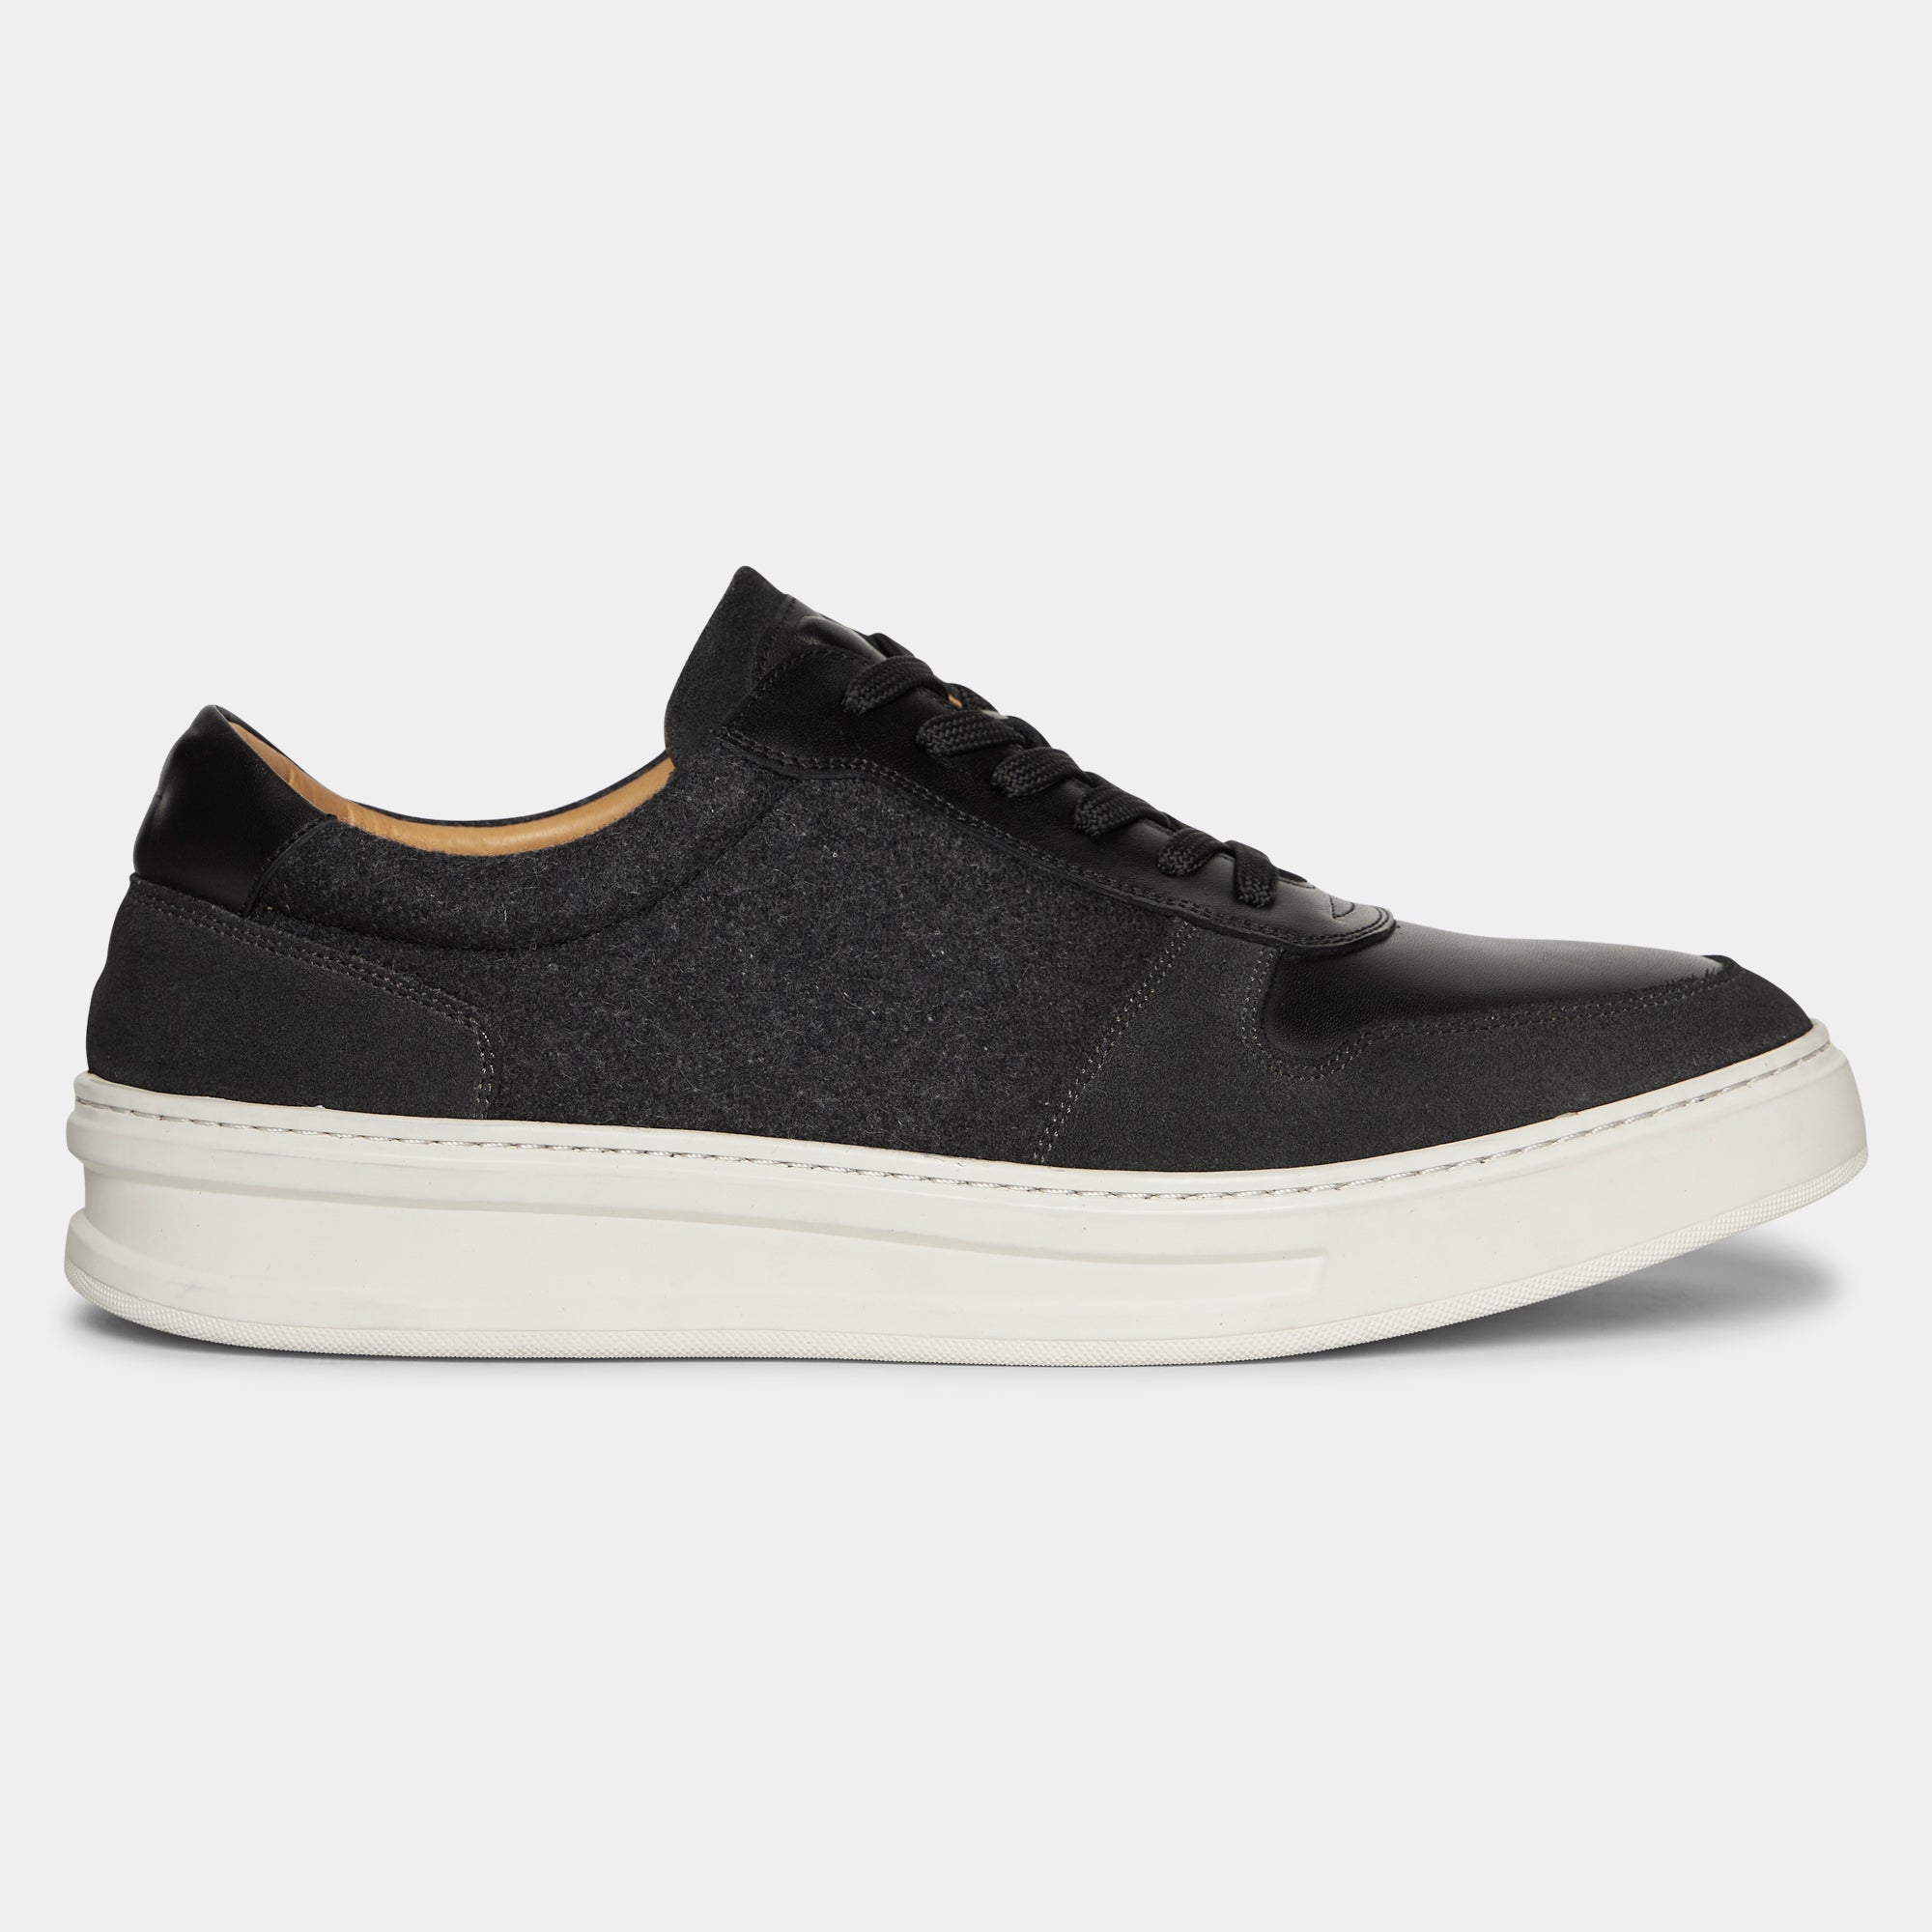 LAB 71X04 550 Sneaker laced Charcoal